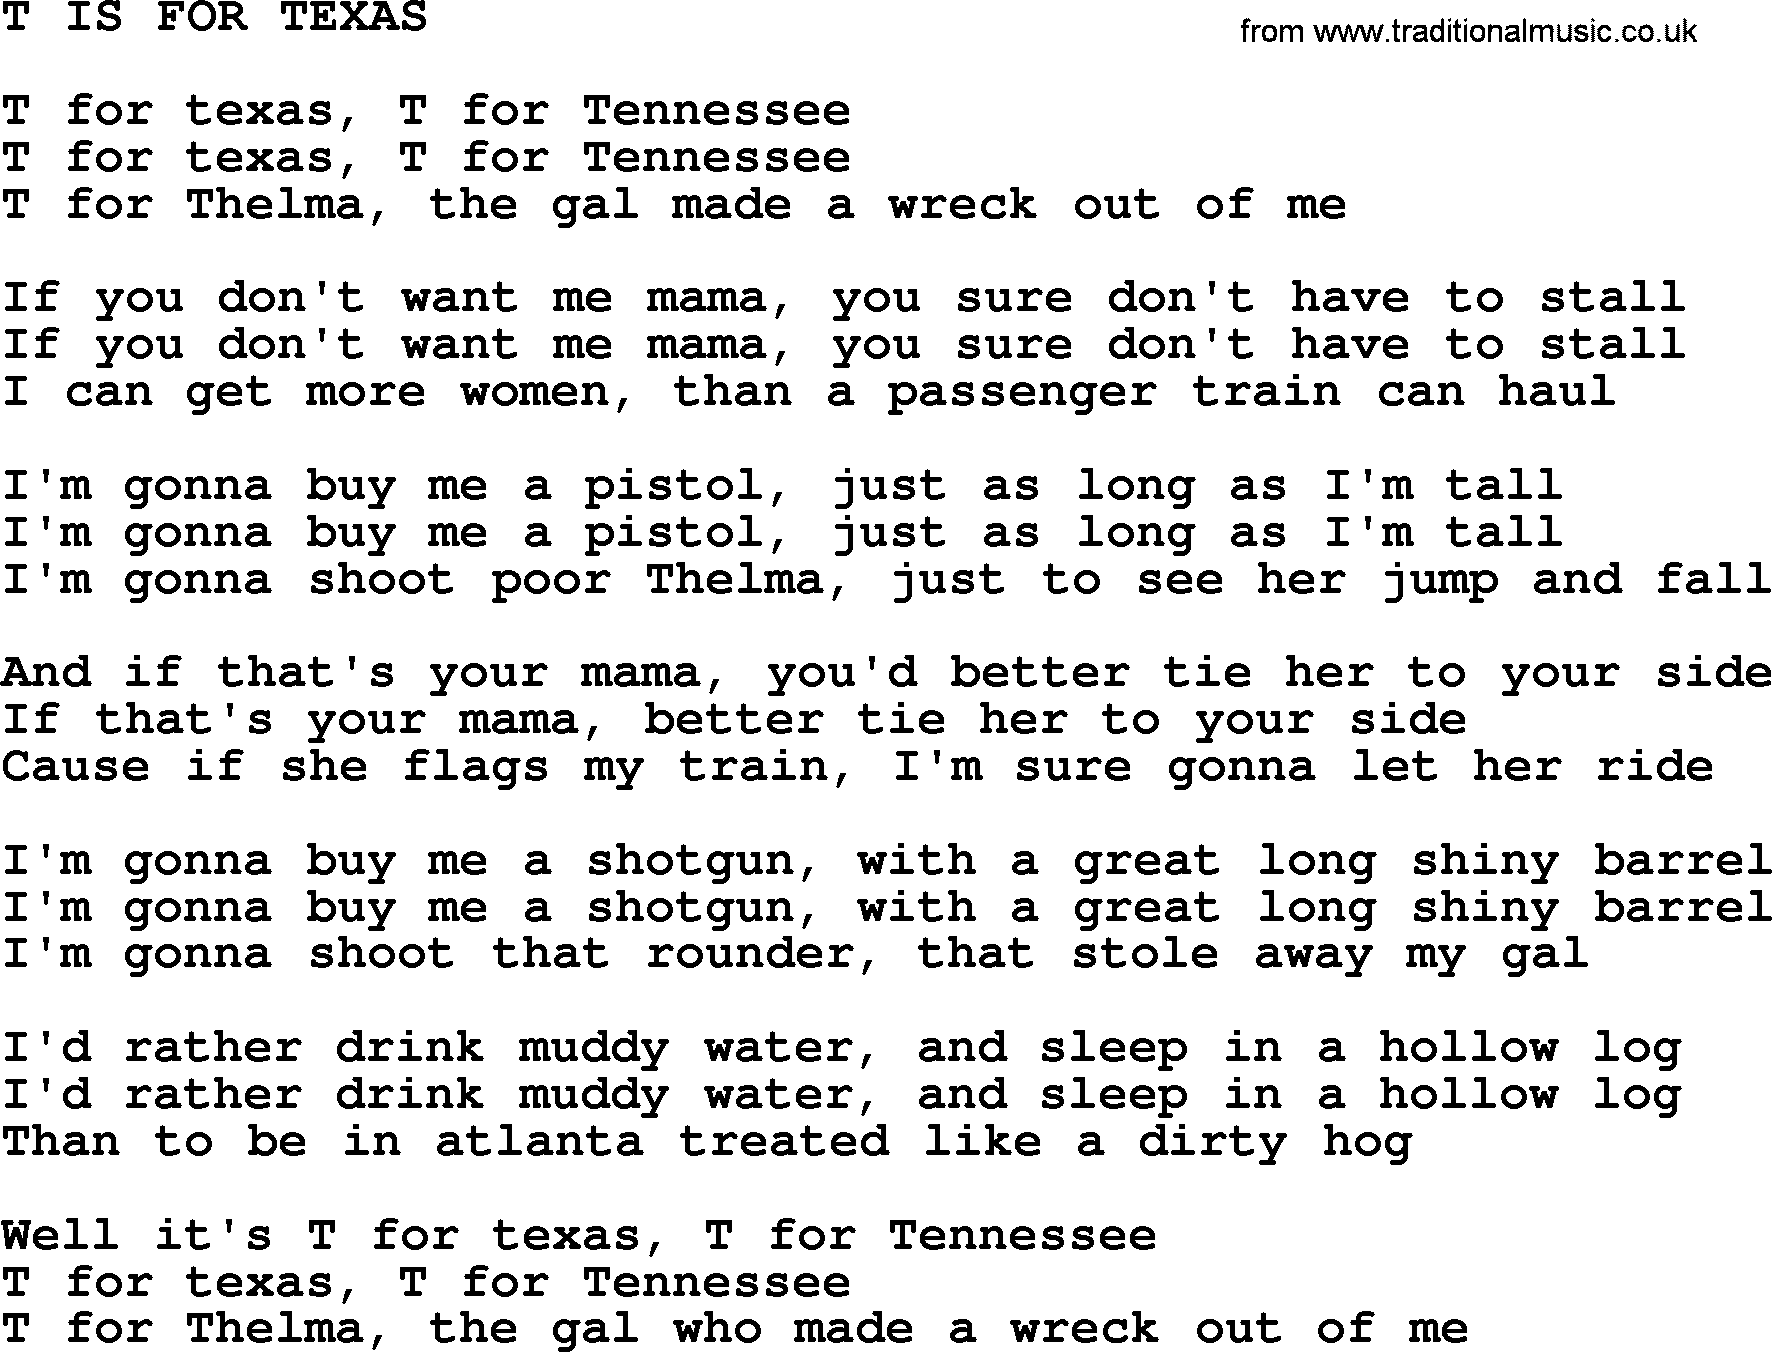 Johnny Cash song T Is For Texas.txt lyrics